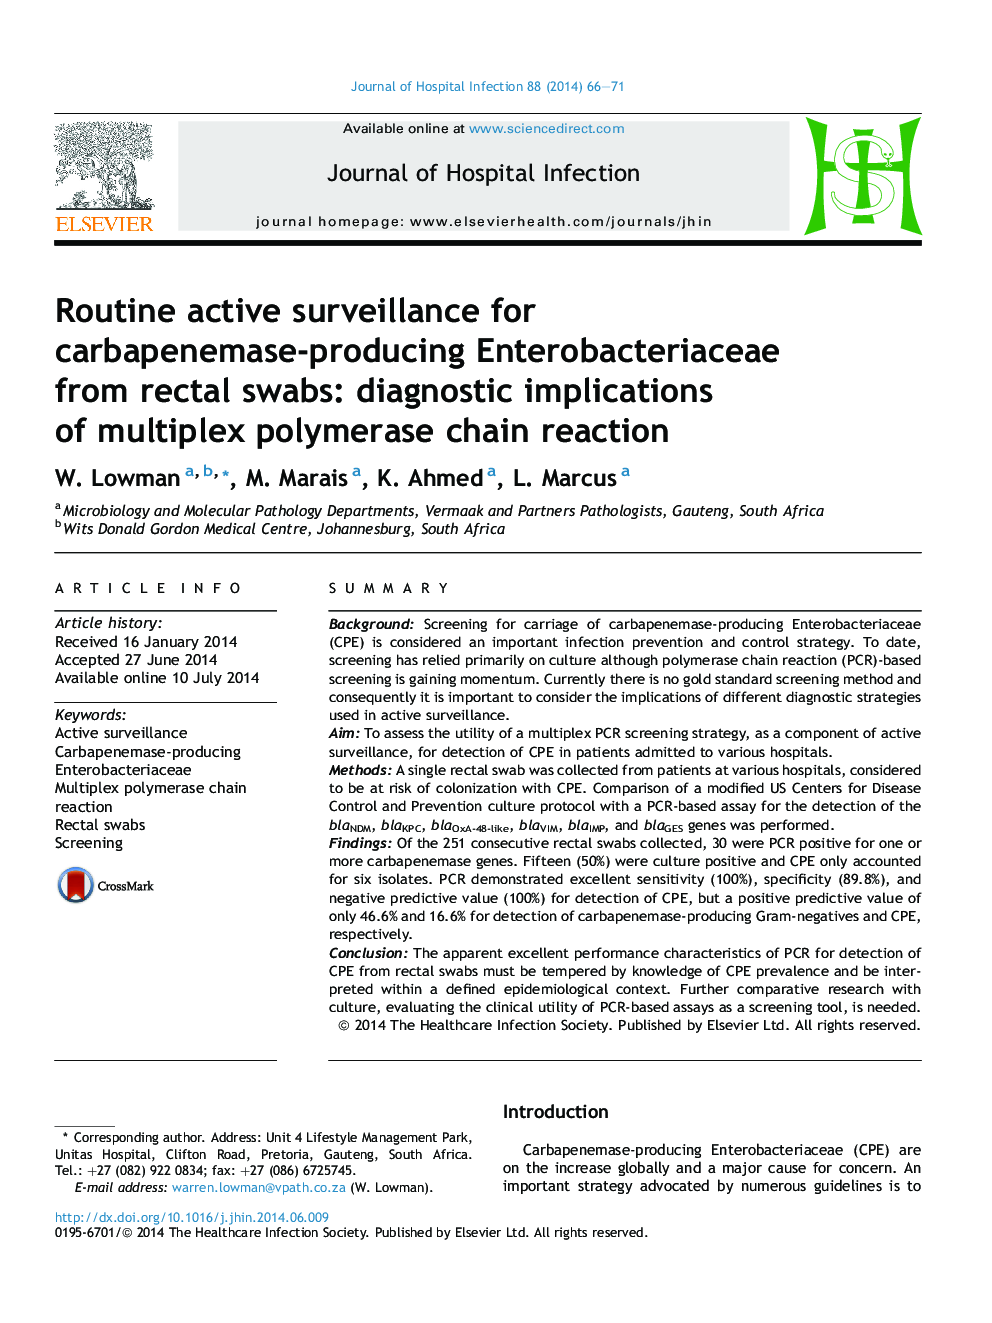 Routine active surveillance for carbapenemase-producing Enterobacteriaceae from rectal swabs: diagnostic implications of multiplex polymerase chain reaction